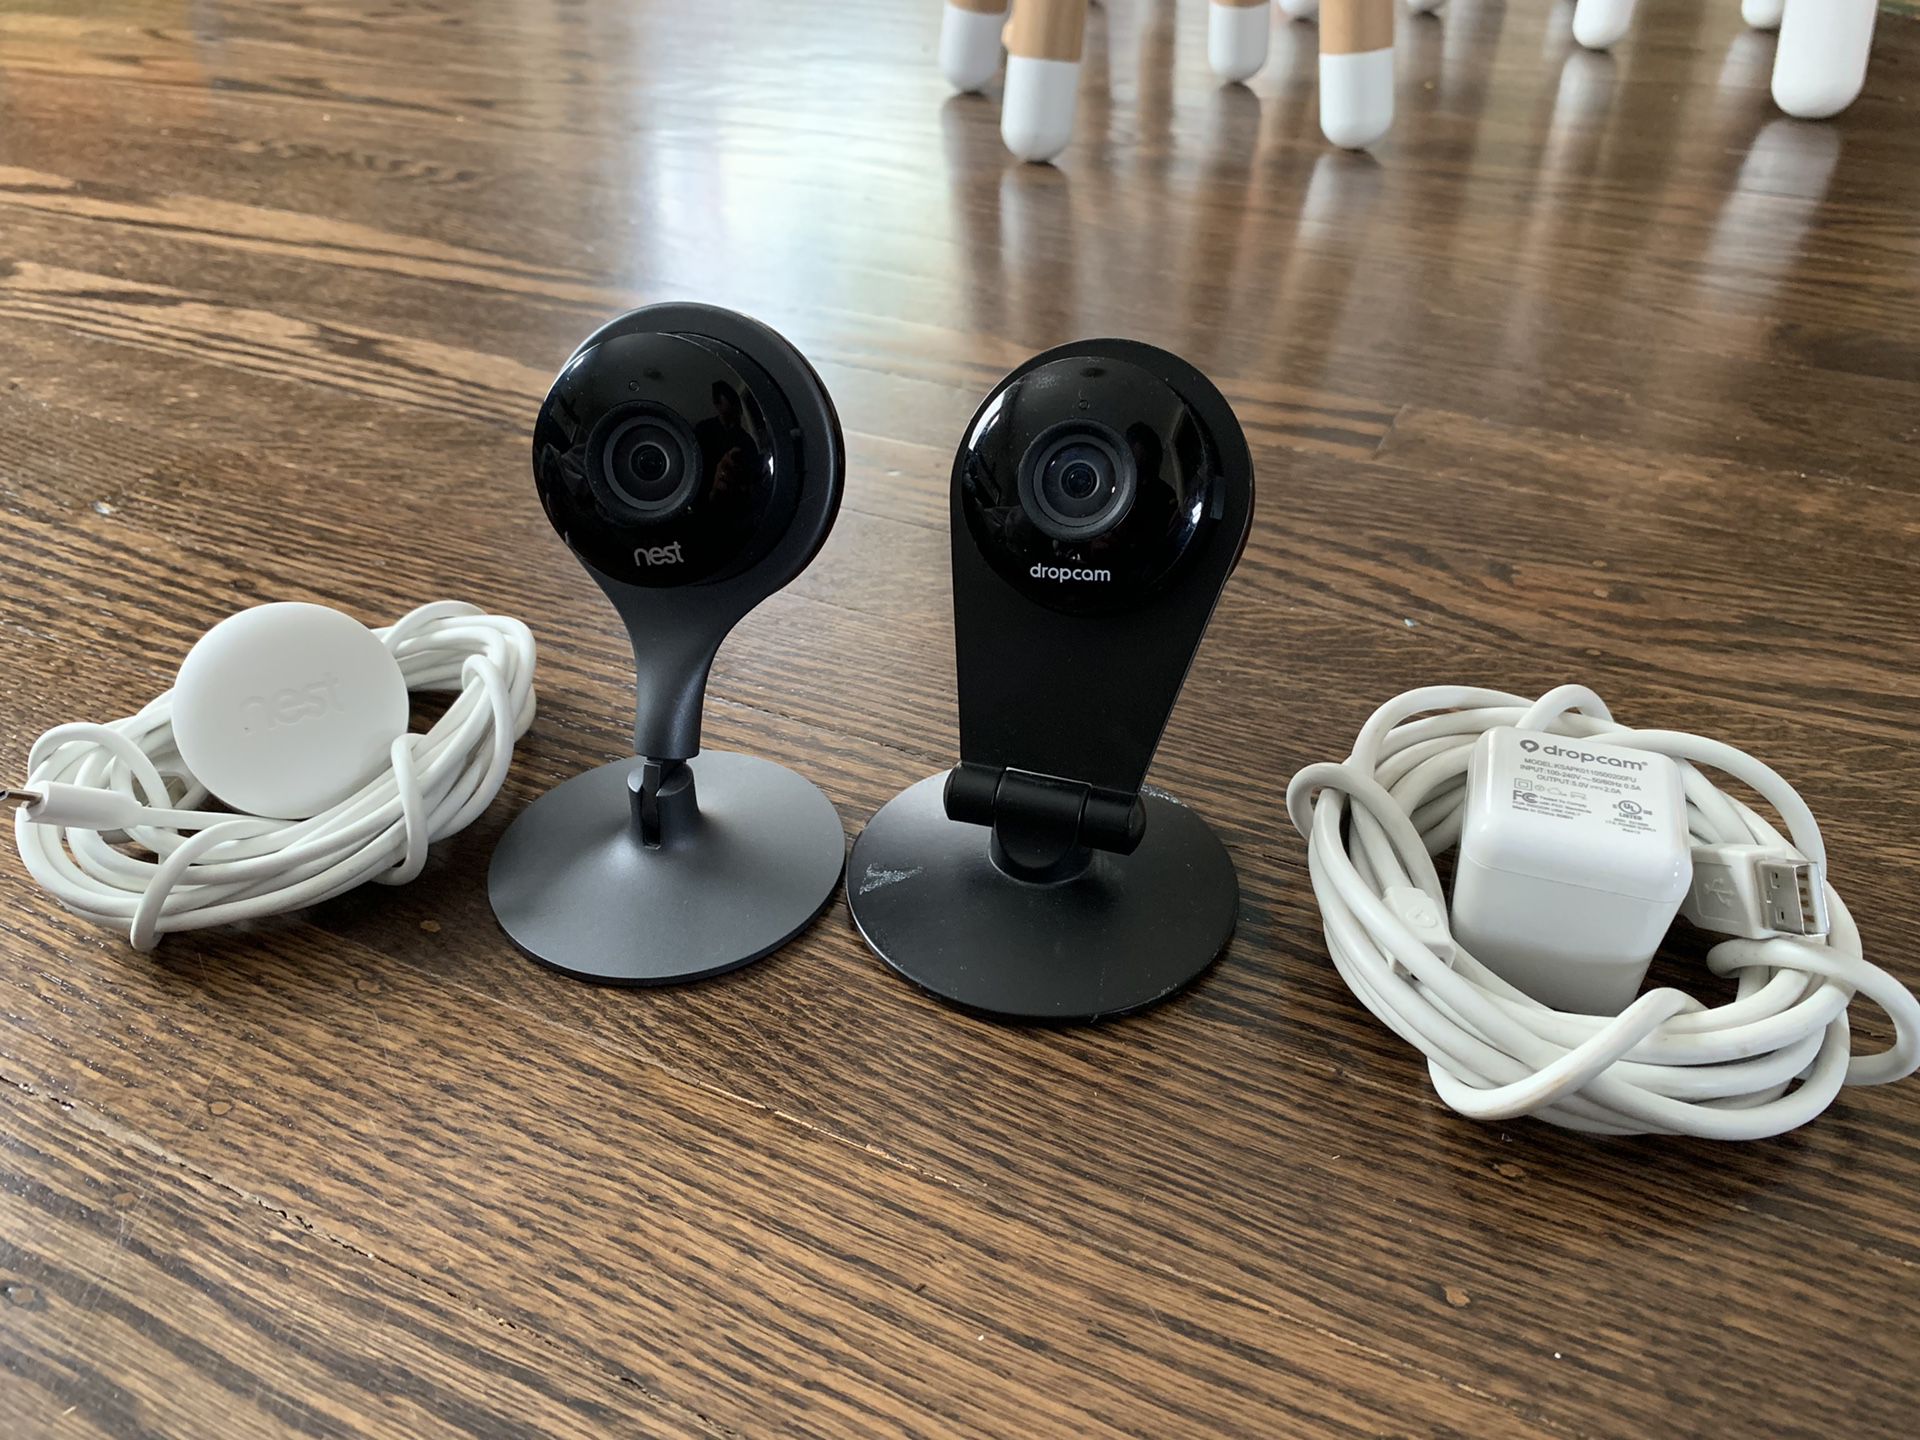 Two Nest Cams